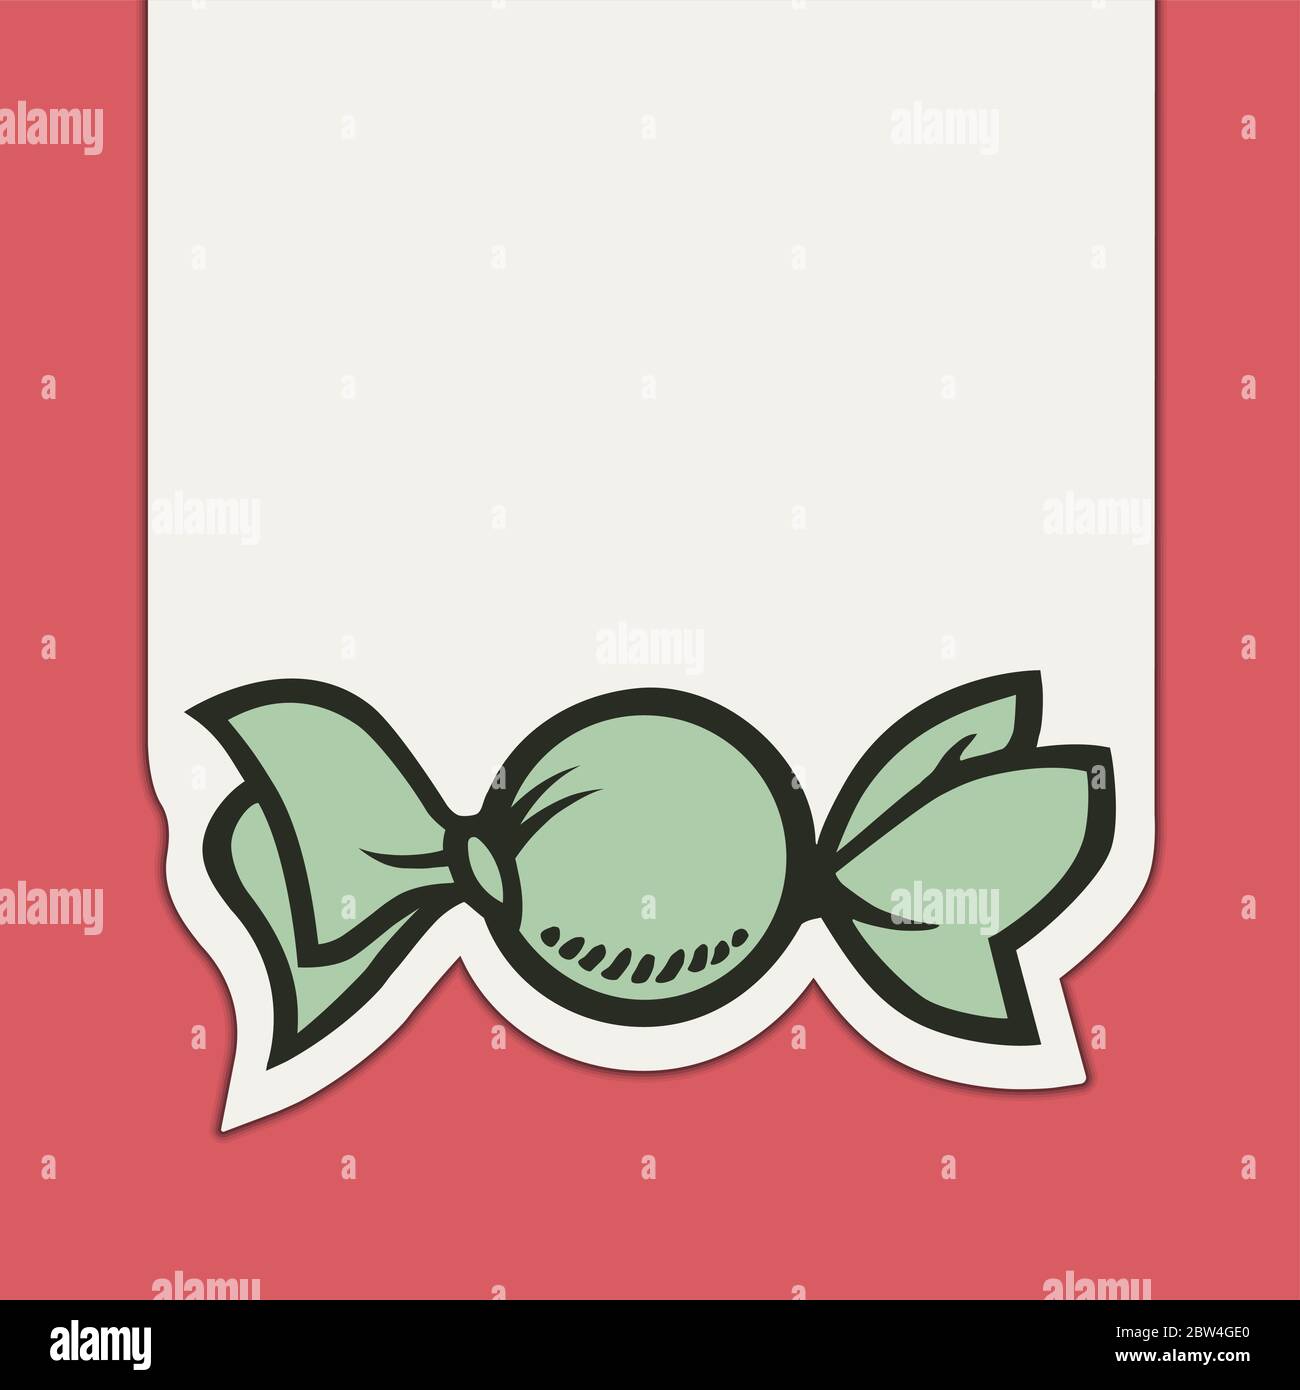 Wrapped candy label design Stock Vector